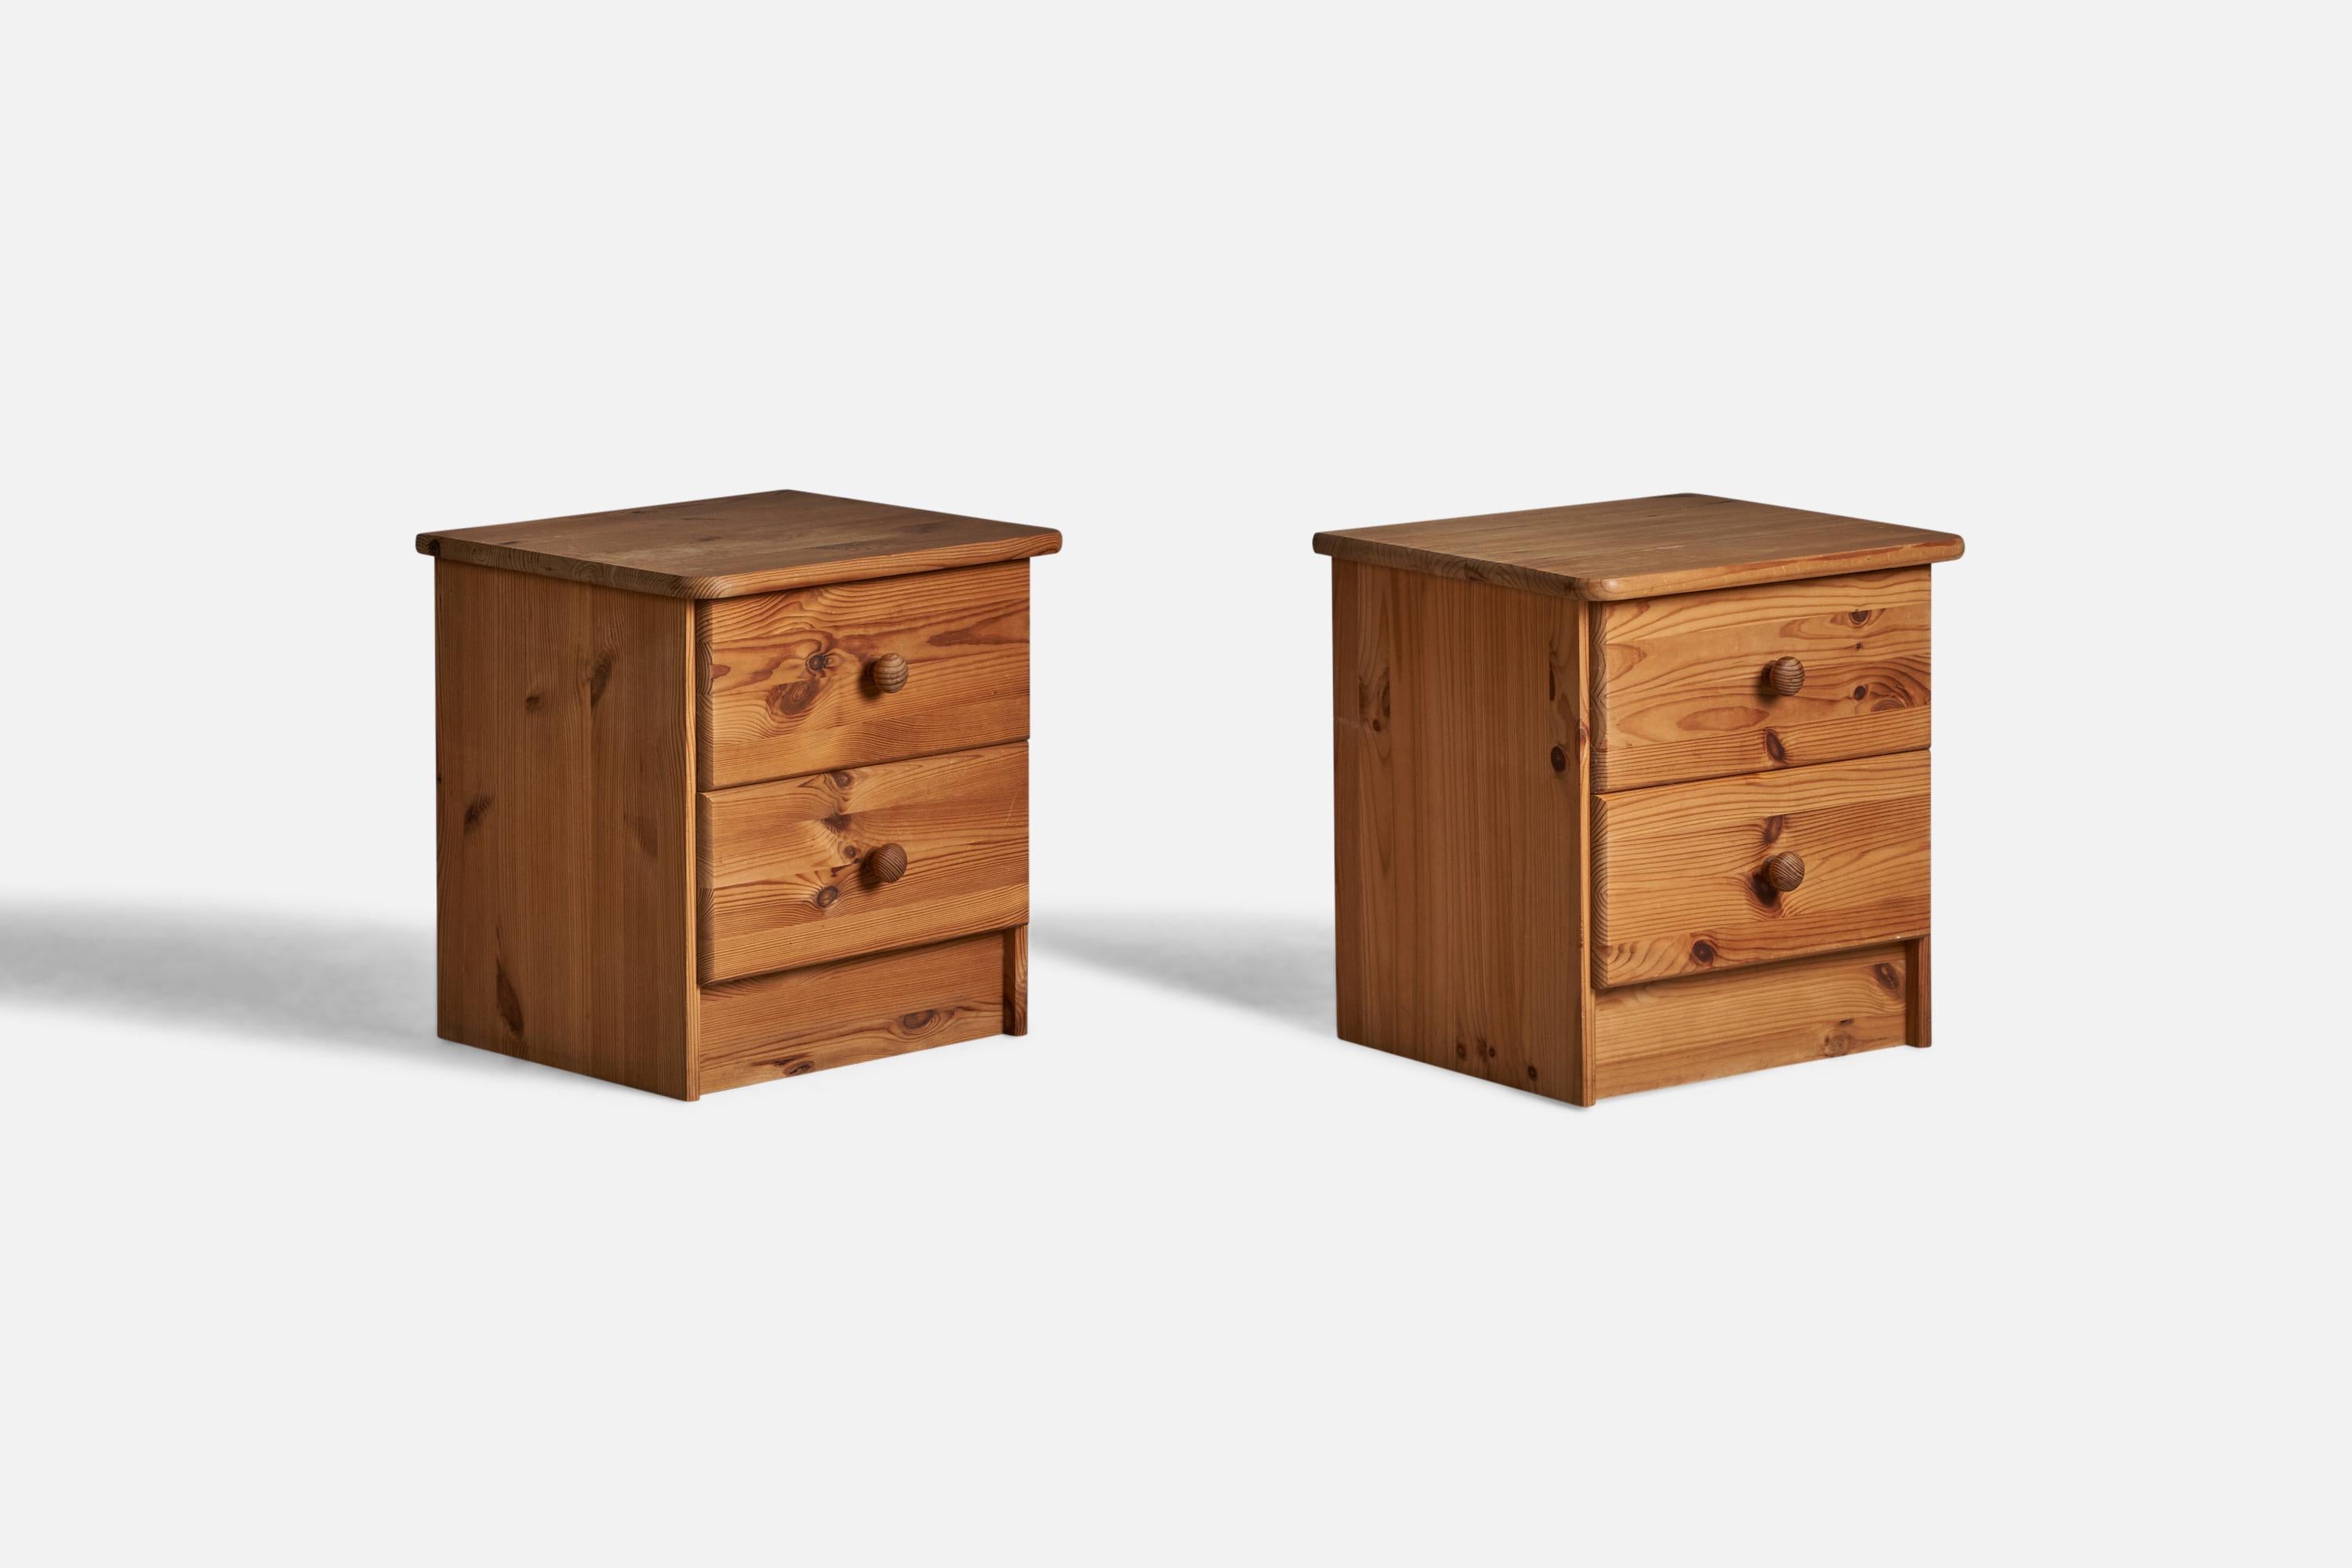 A pair of pine nightstands or bedside cabinets designed and produced in Denmark, 1960s.